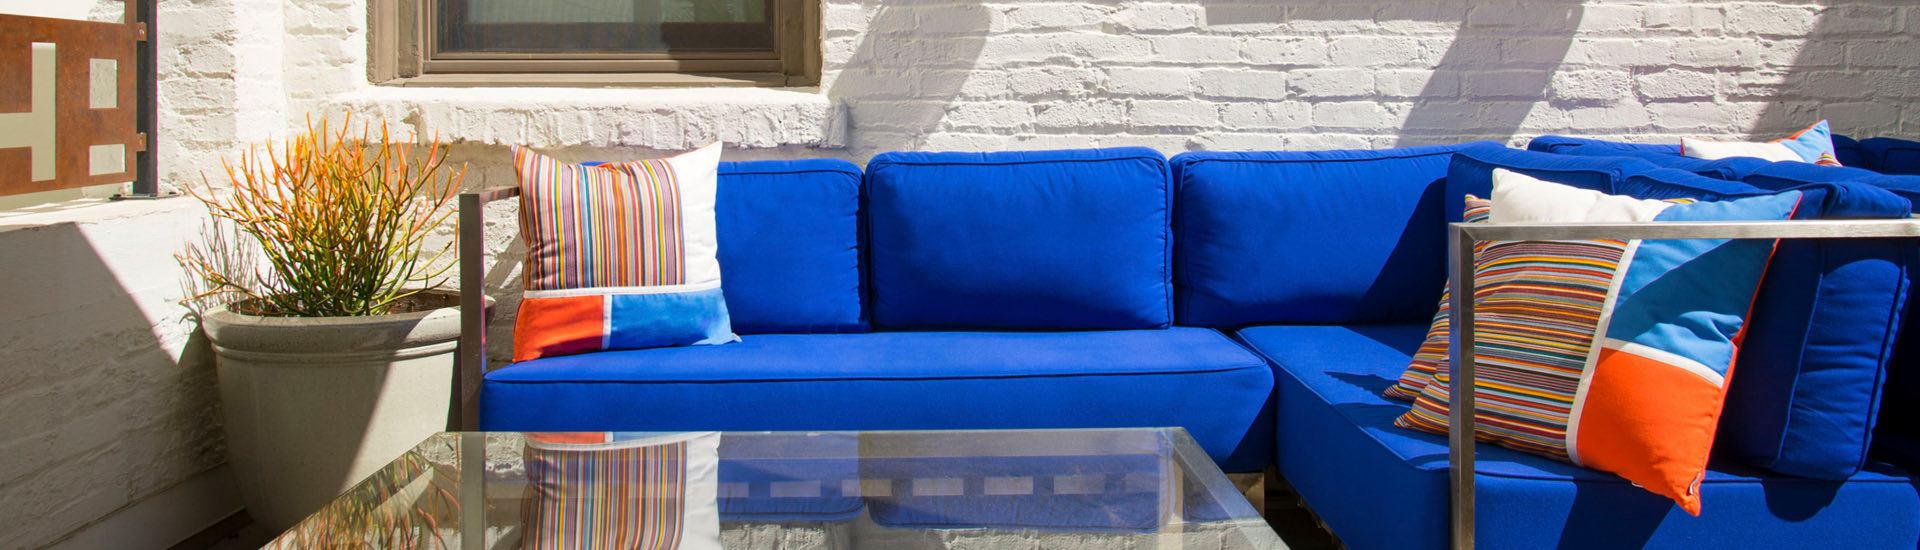 blue couch with colorful pillows on a patio